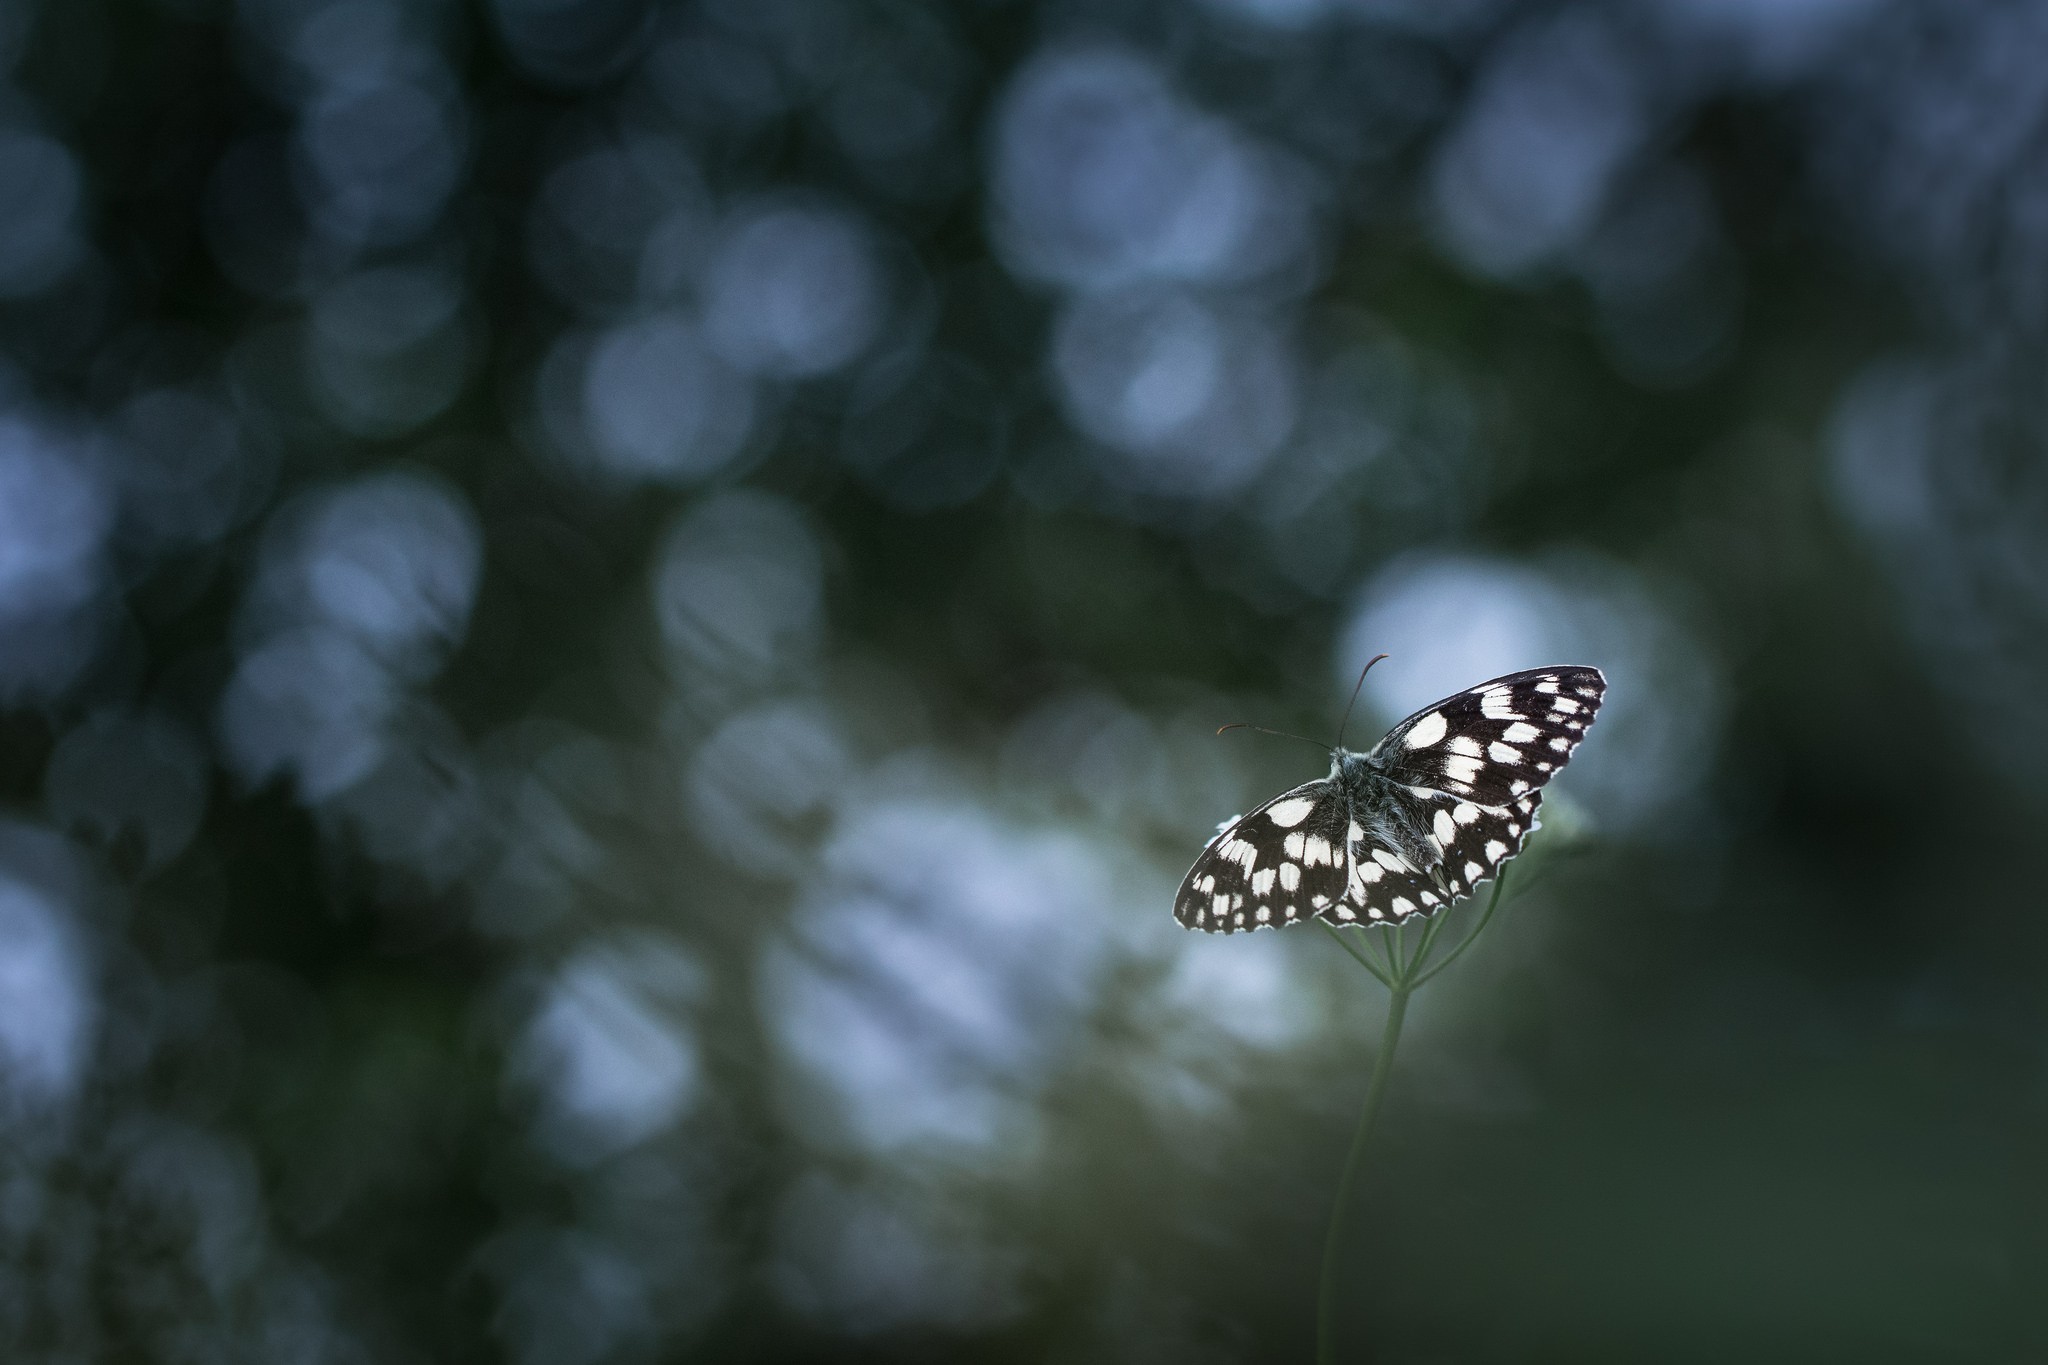 General 2048x1365 photography nature macro butterfly bokeh animals insect